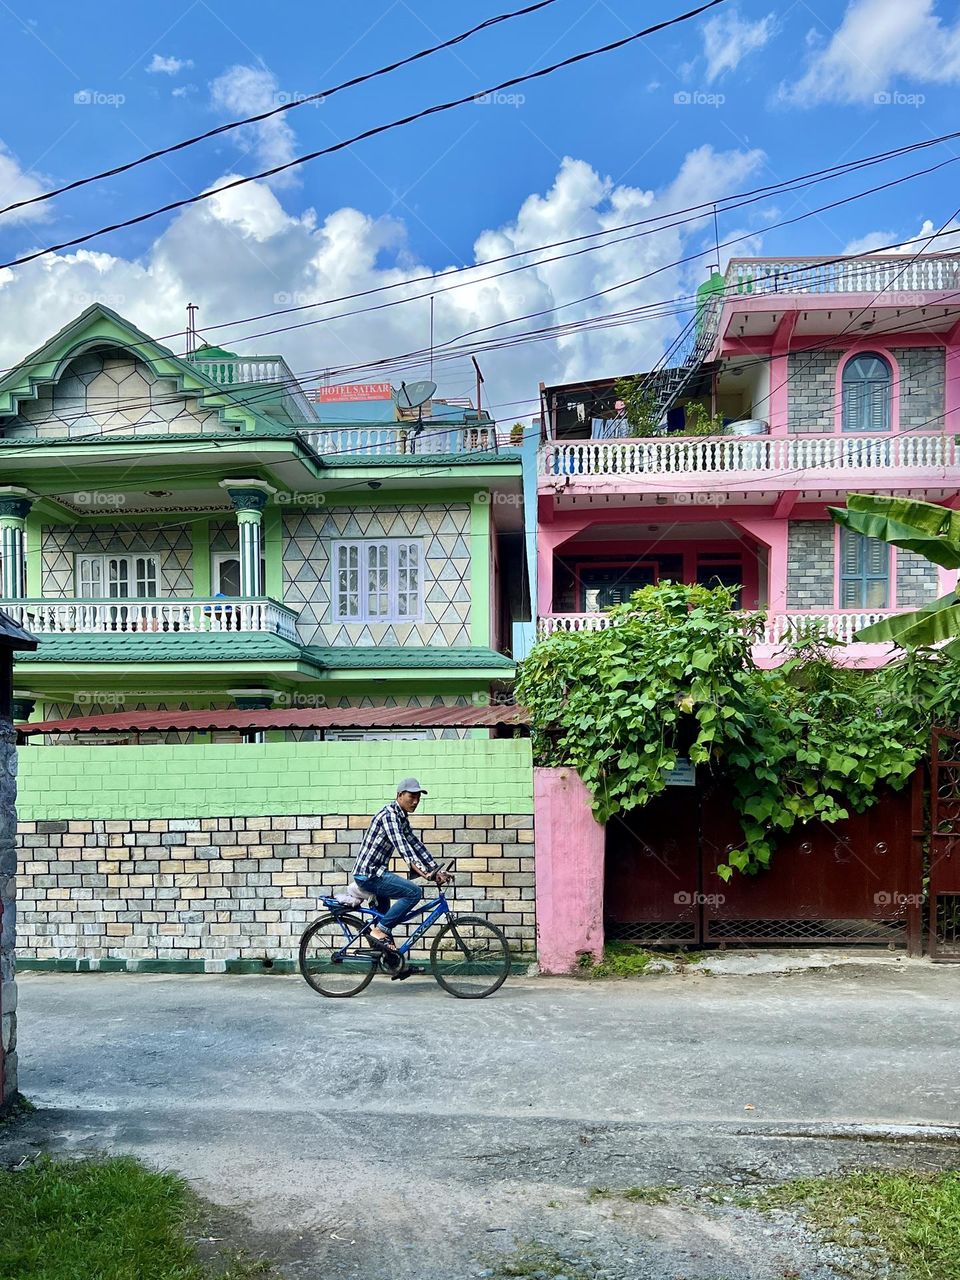 Man riding bicycle on the street with colourful houses